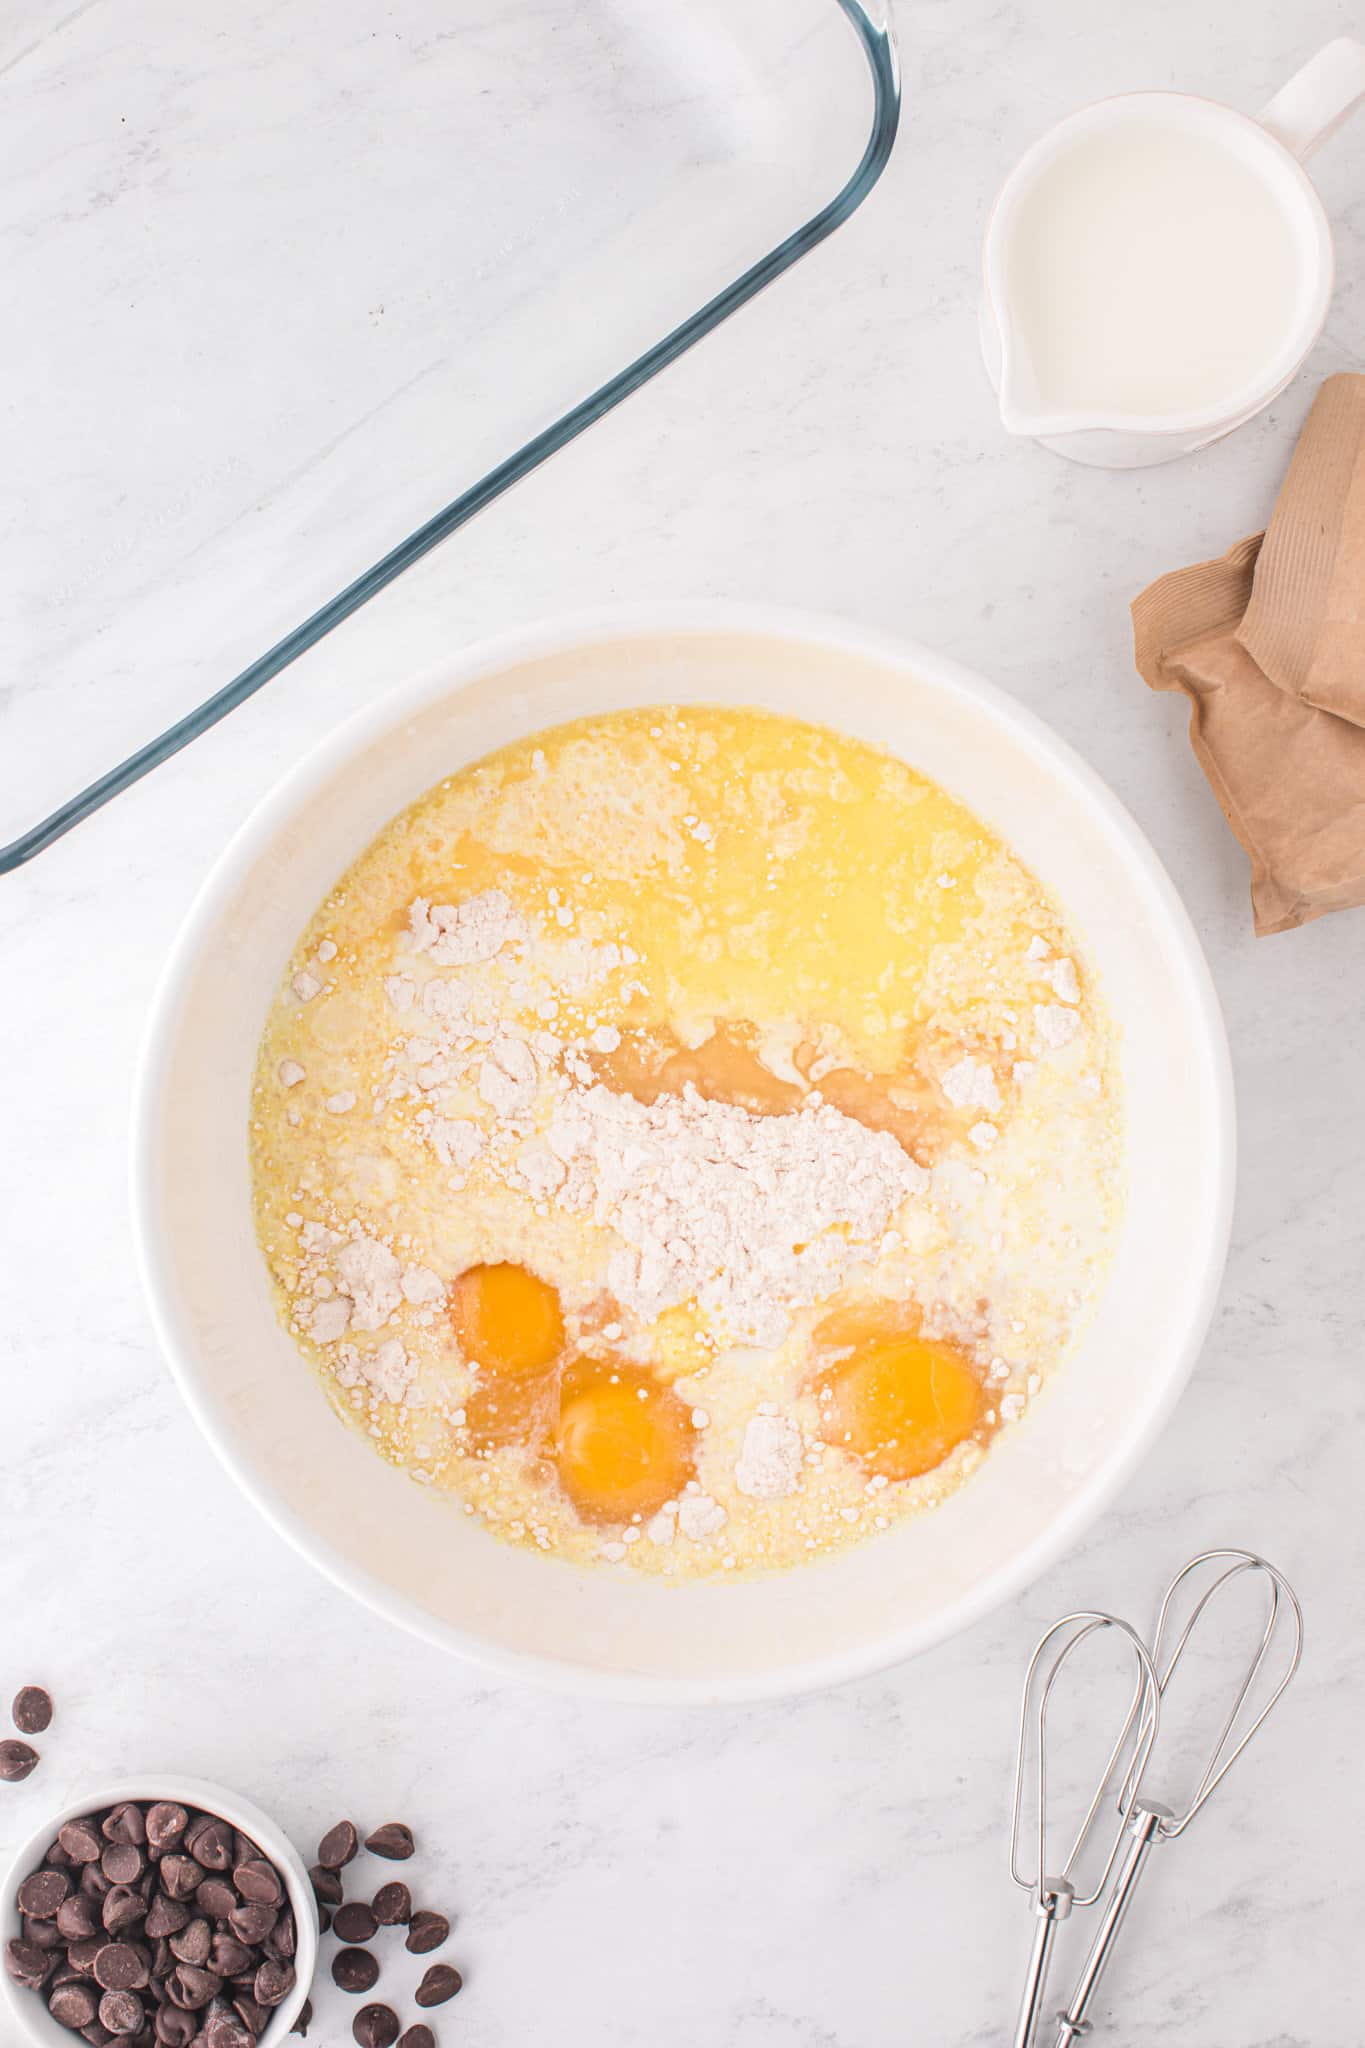 cake mix, eggs, cream and melted butter in a mixing bowl